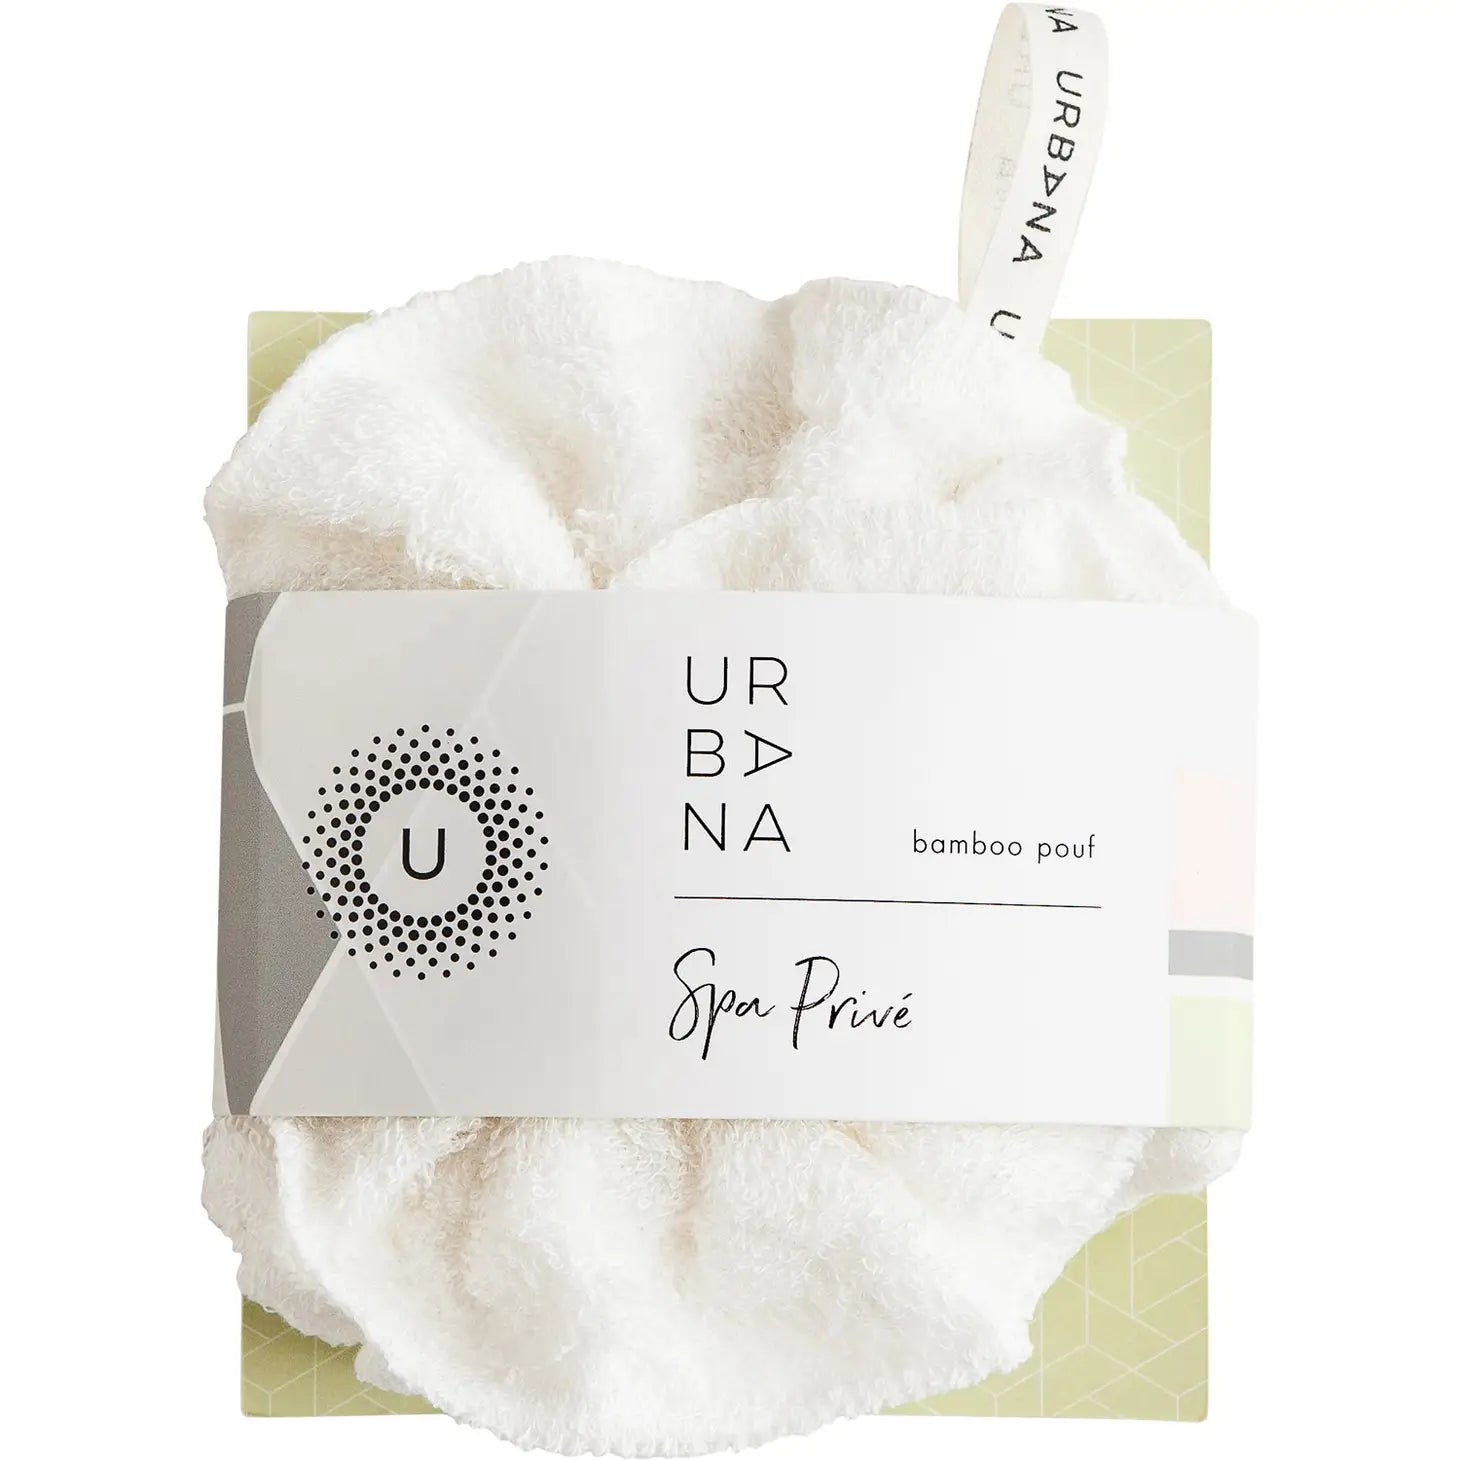 Spa Privé White Bamboo Pouf by Urbana in Packaging